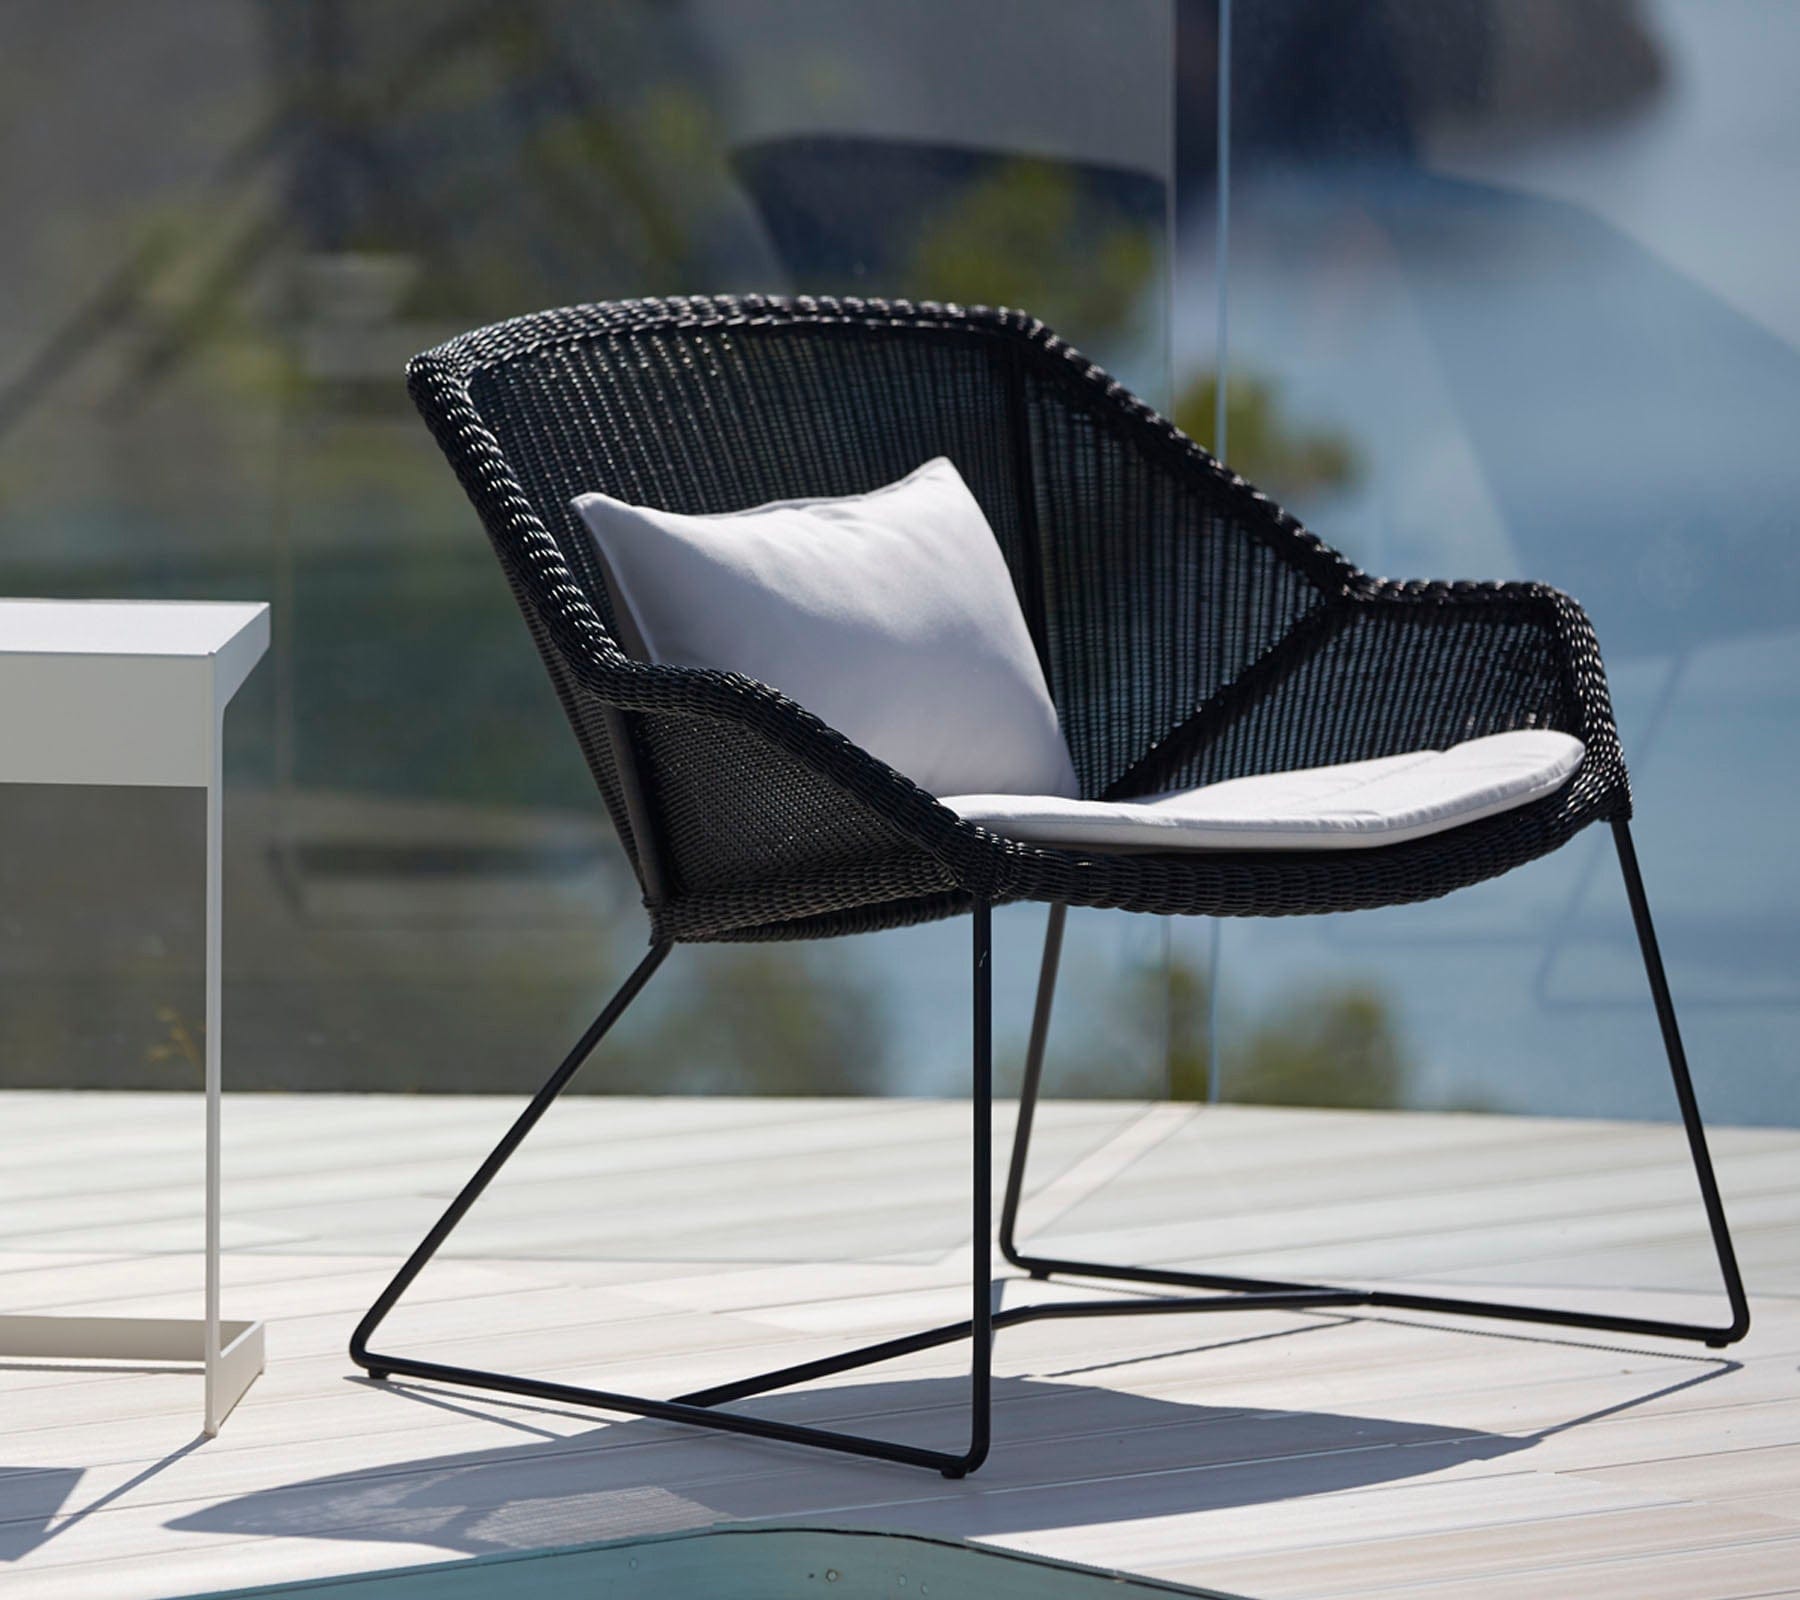 Boxhill's Breeze Outdoor Lounge Chair Black lifestyle image with white cushion